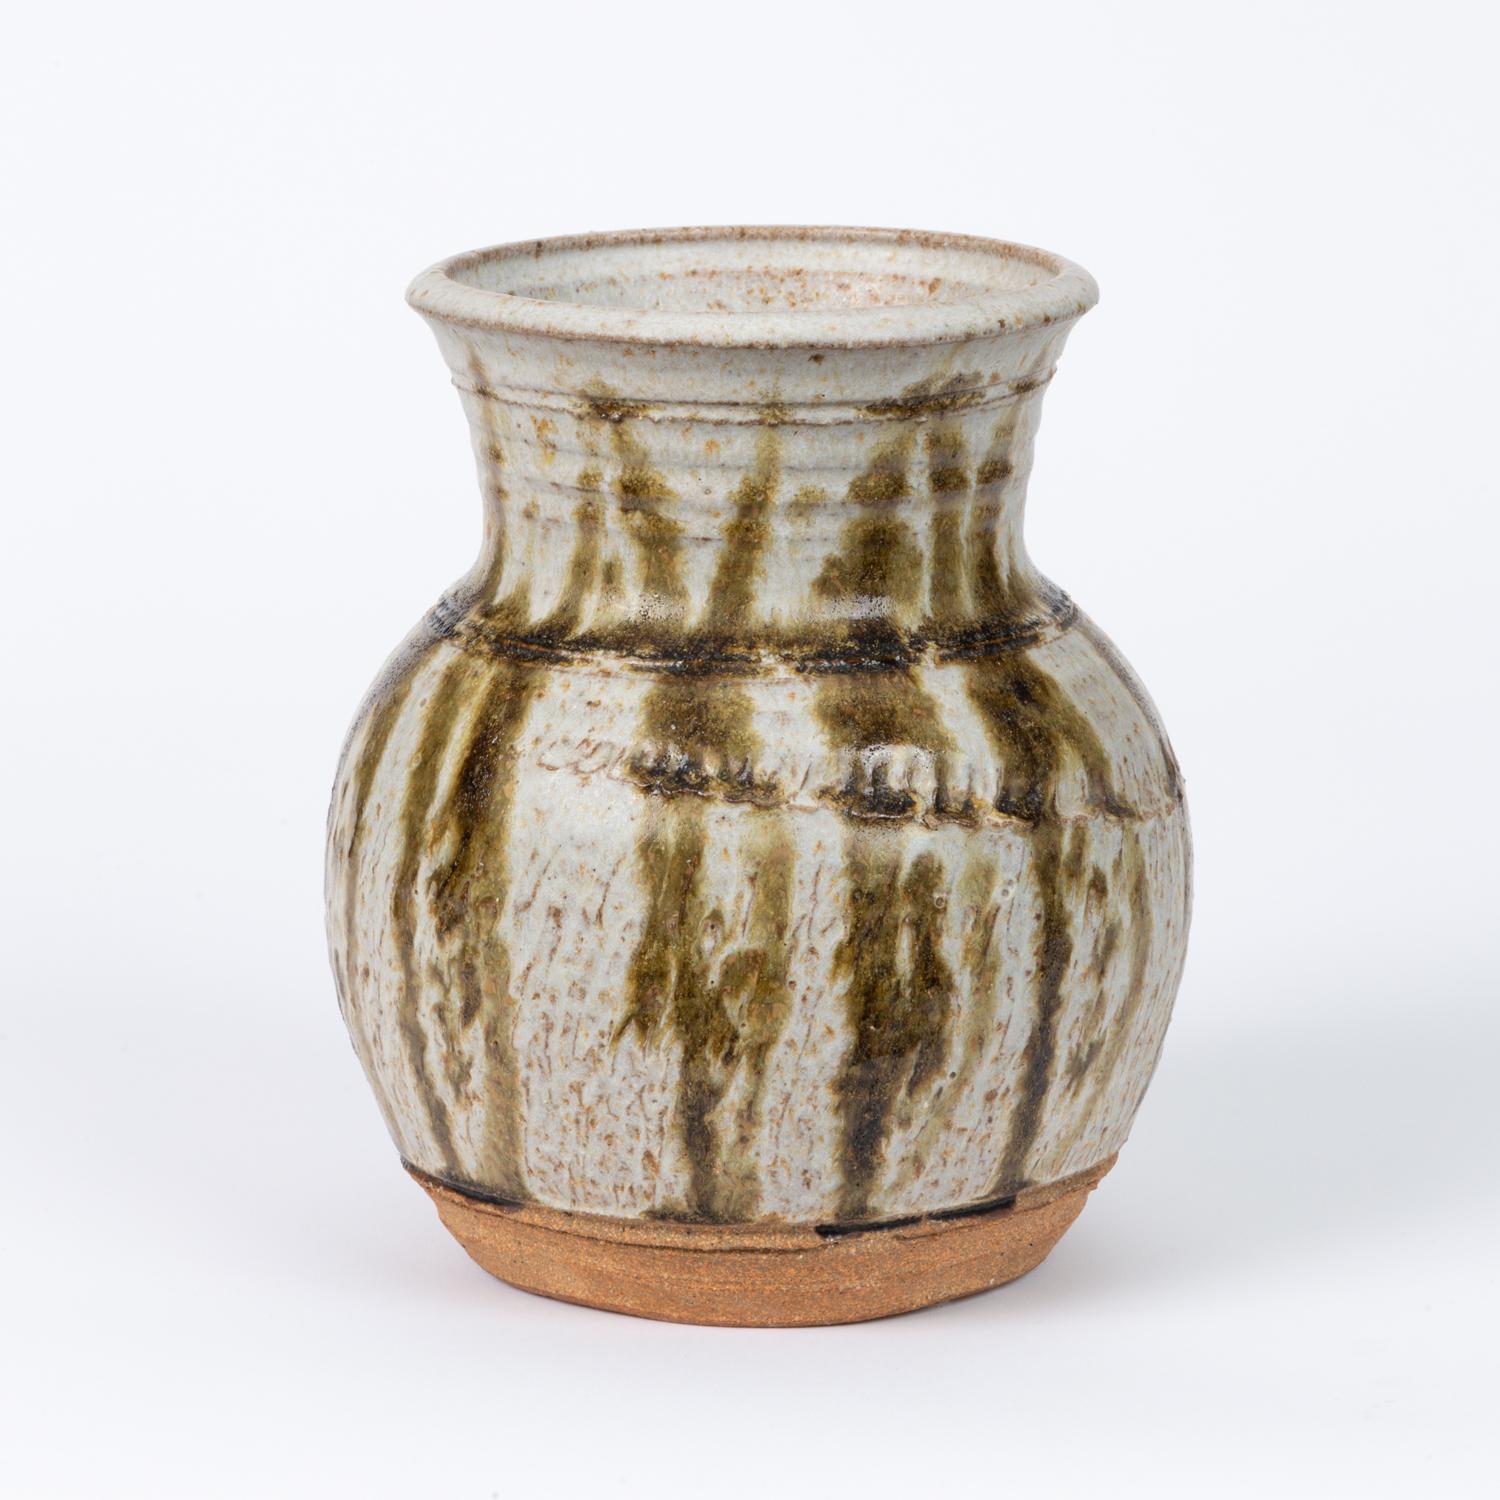 A Studio Pottery ceramic vessel in glazed stoneware. The pieces features a khaki colored glaze with vertical dark green striation, while the bottom and lower portion is left unglazed in the natural stoneware clay. Signed by artist on